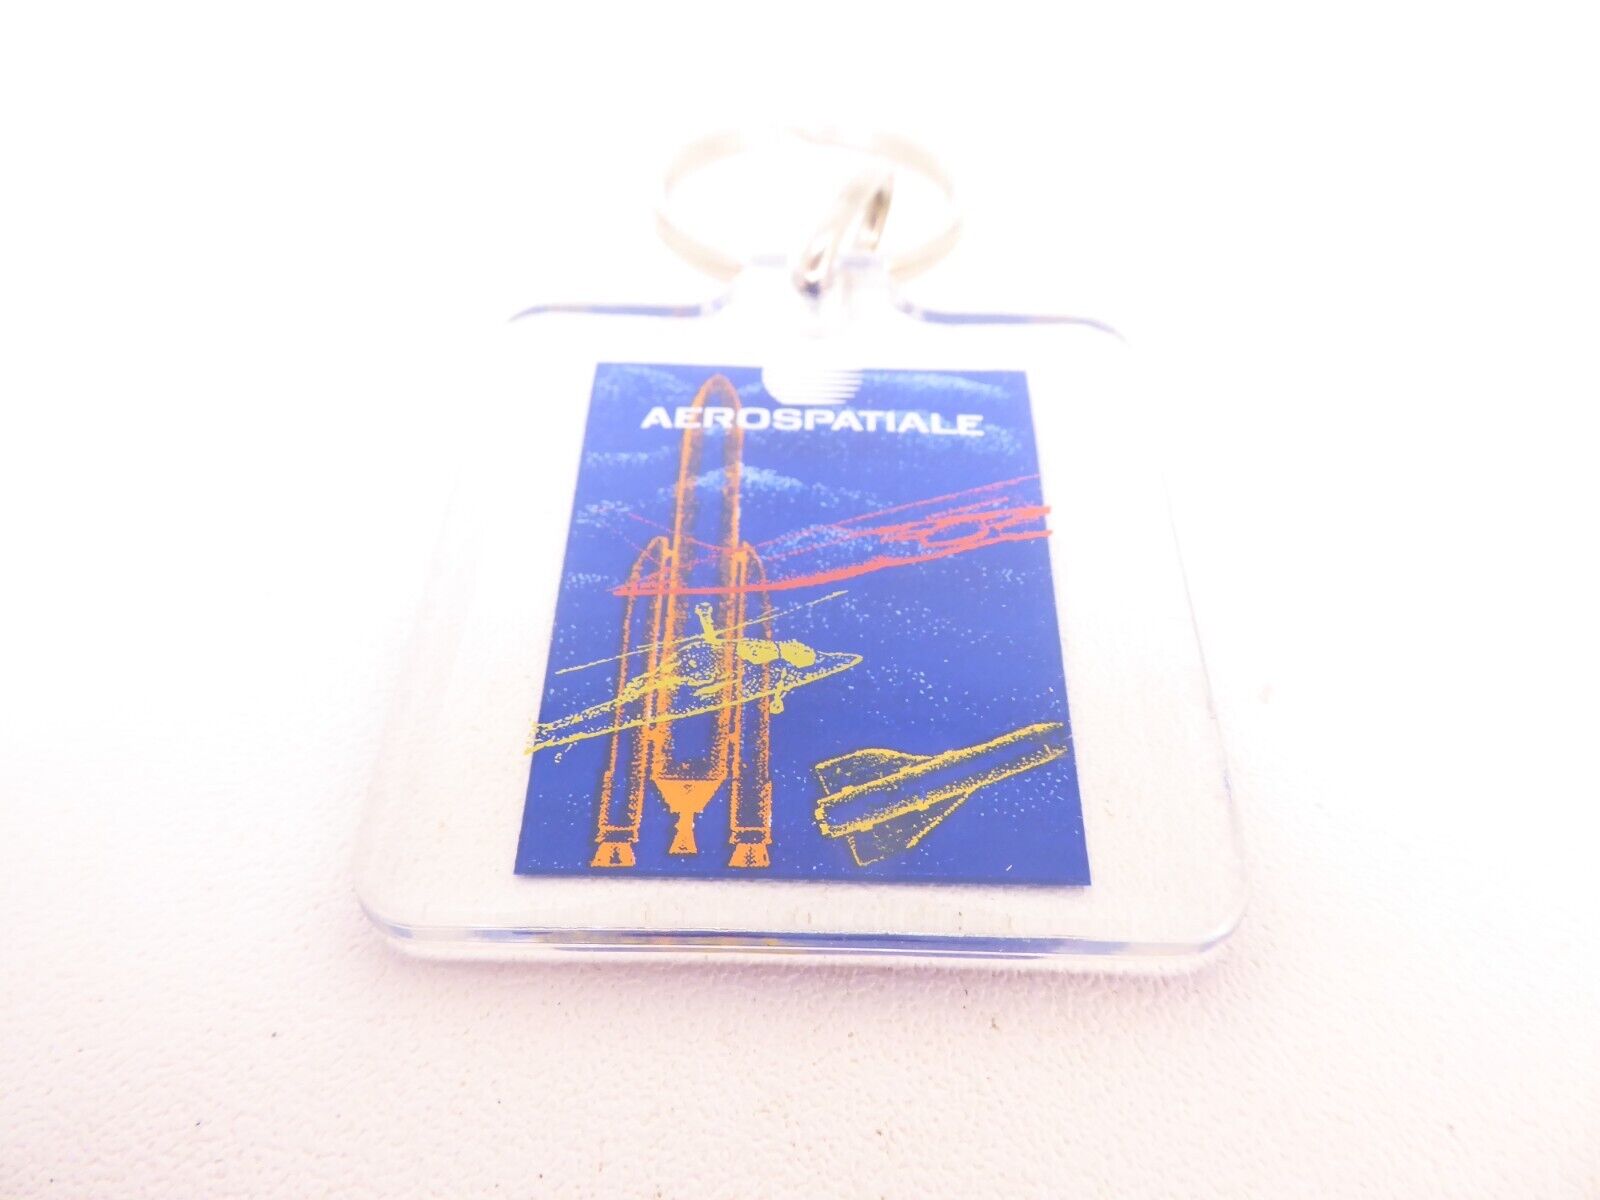 Keychain / Key Ring - AEROSPACE - AIRBUS - ARIANNE - EXOCET - INCLUSION